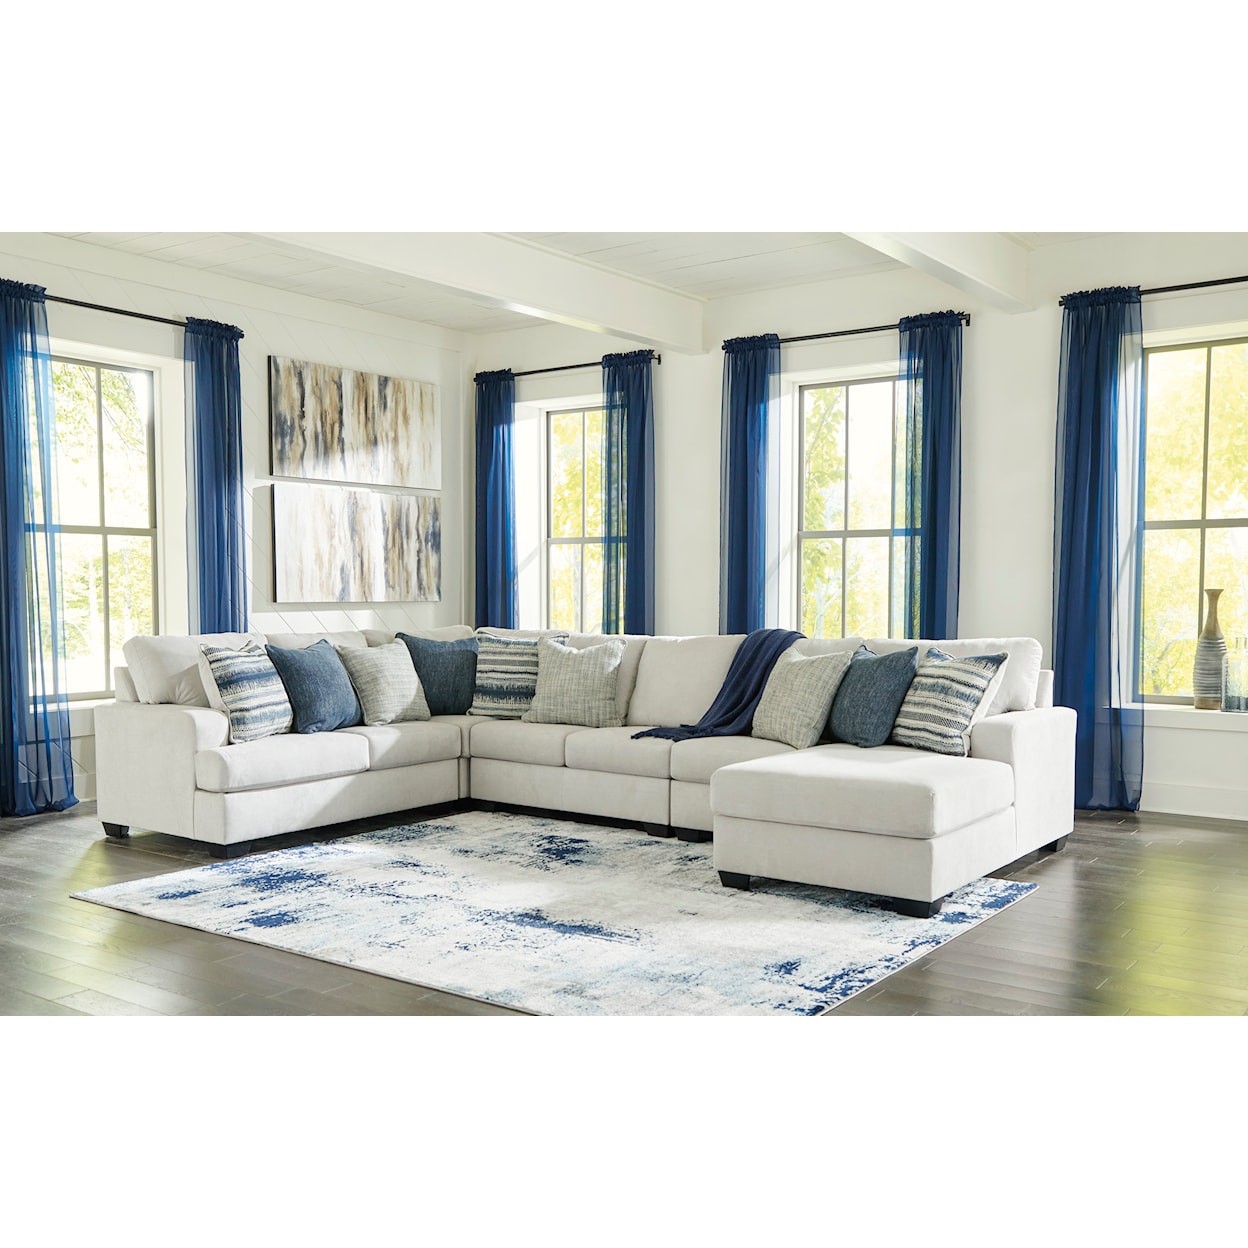 Ashley Furniture Benchcraft Lowder 5-Piece Sectional with Chaise